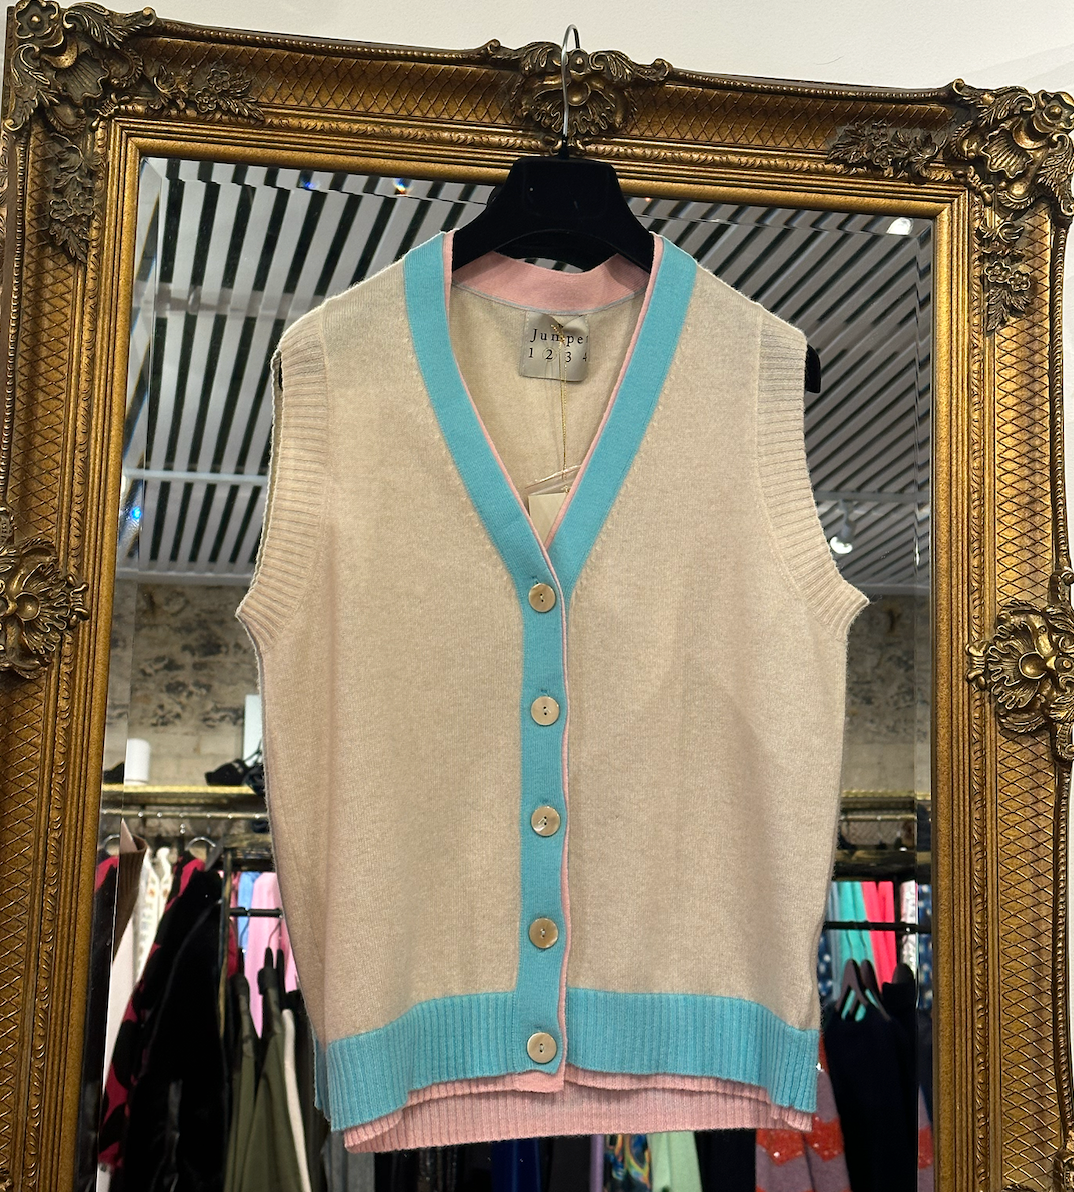 Cashmere Double Rib Sleeveless Cardigan in Oatmeal, Opal and Pale Pink by Jumper 1234